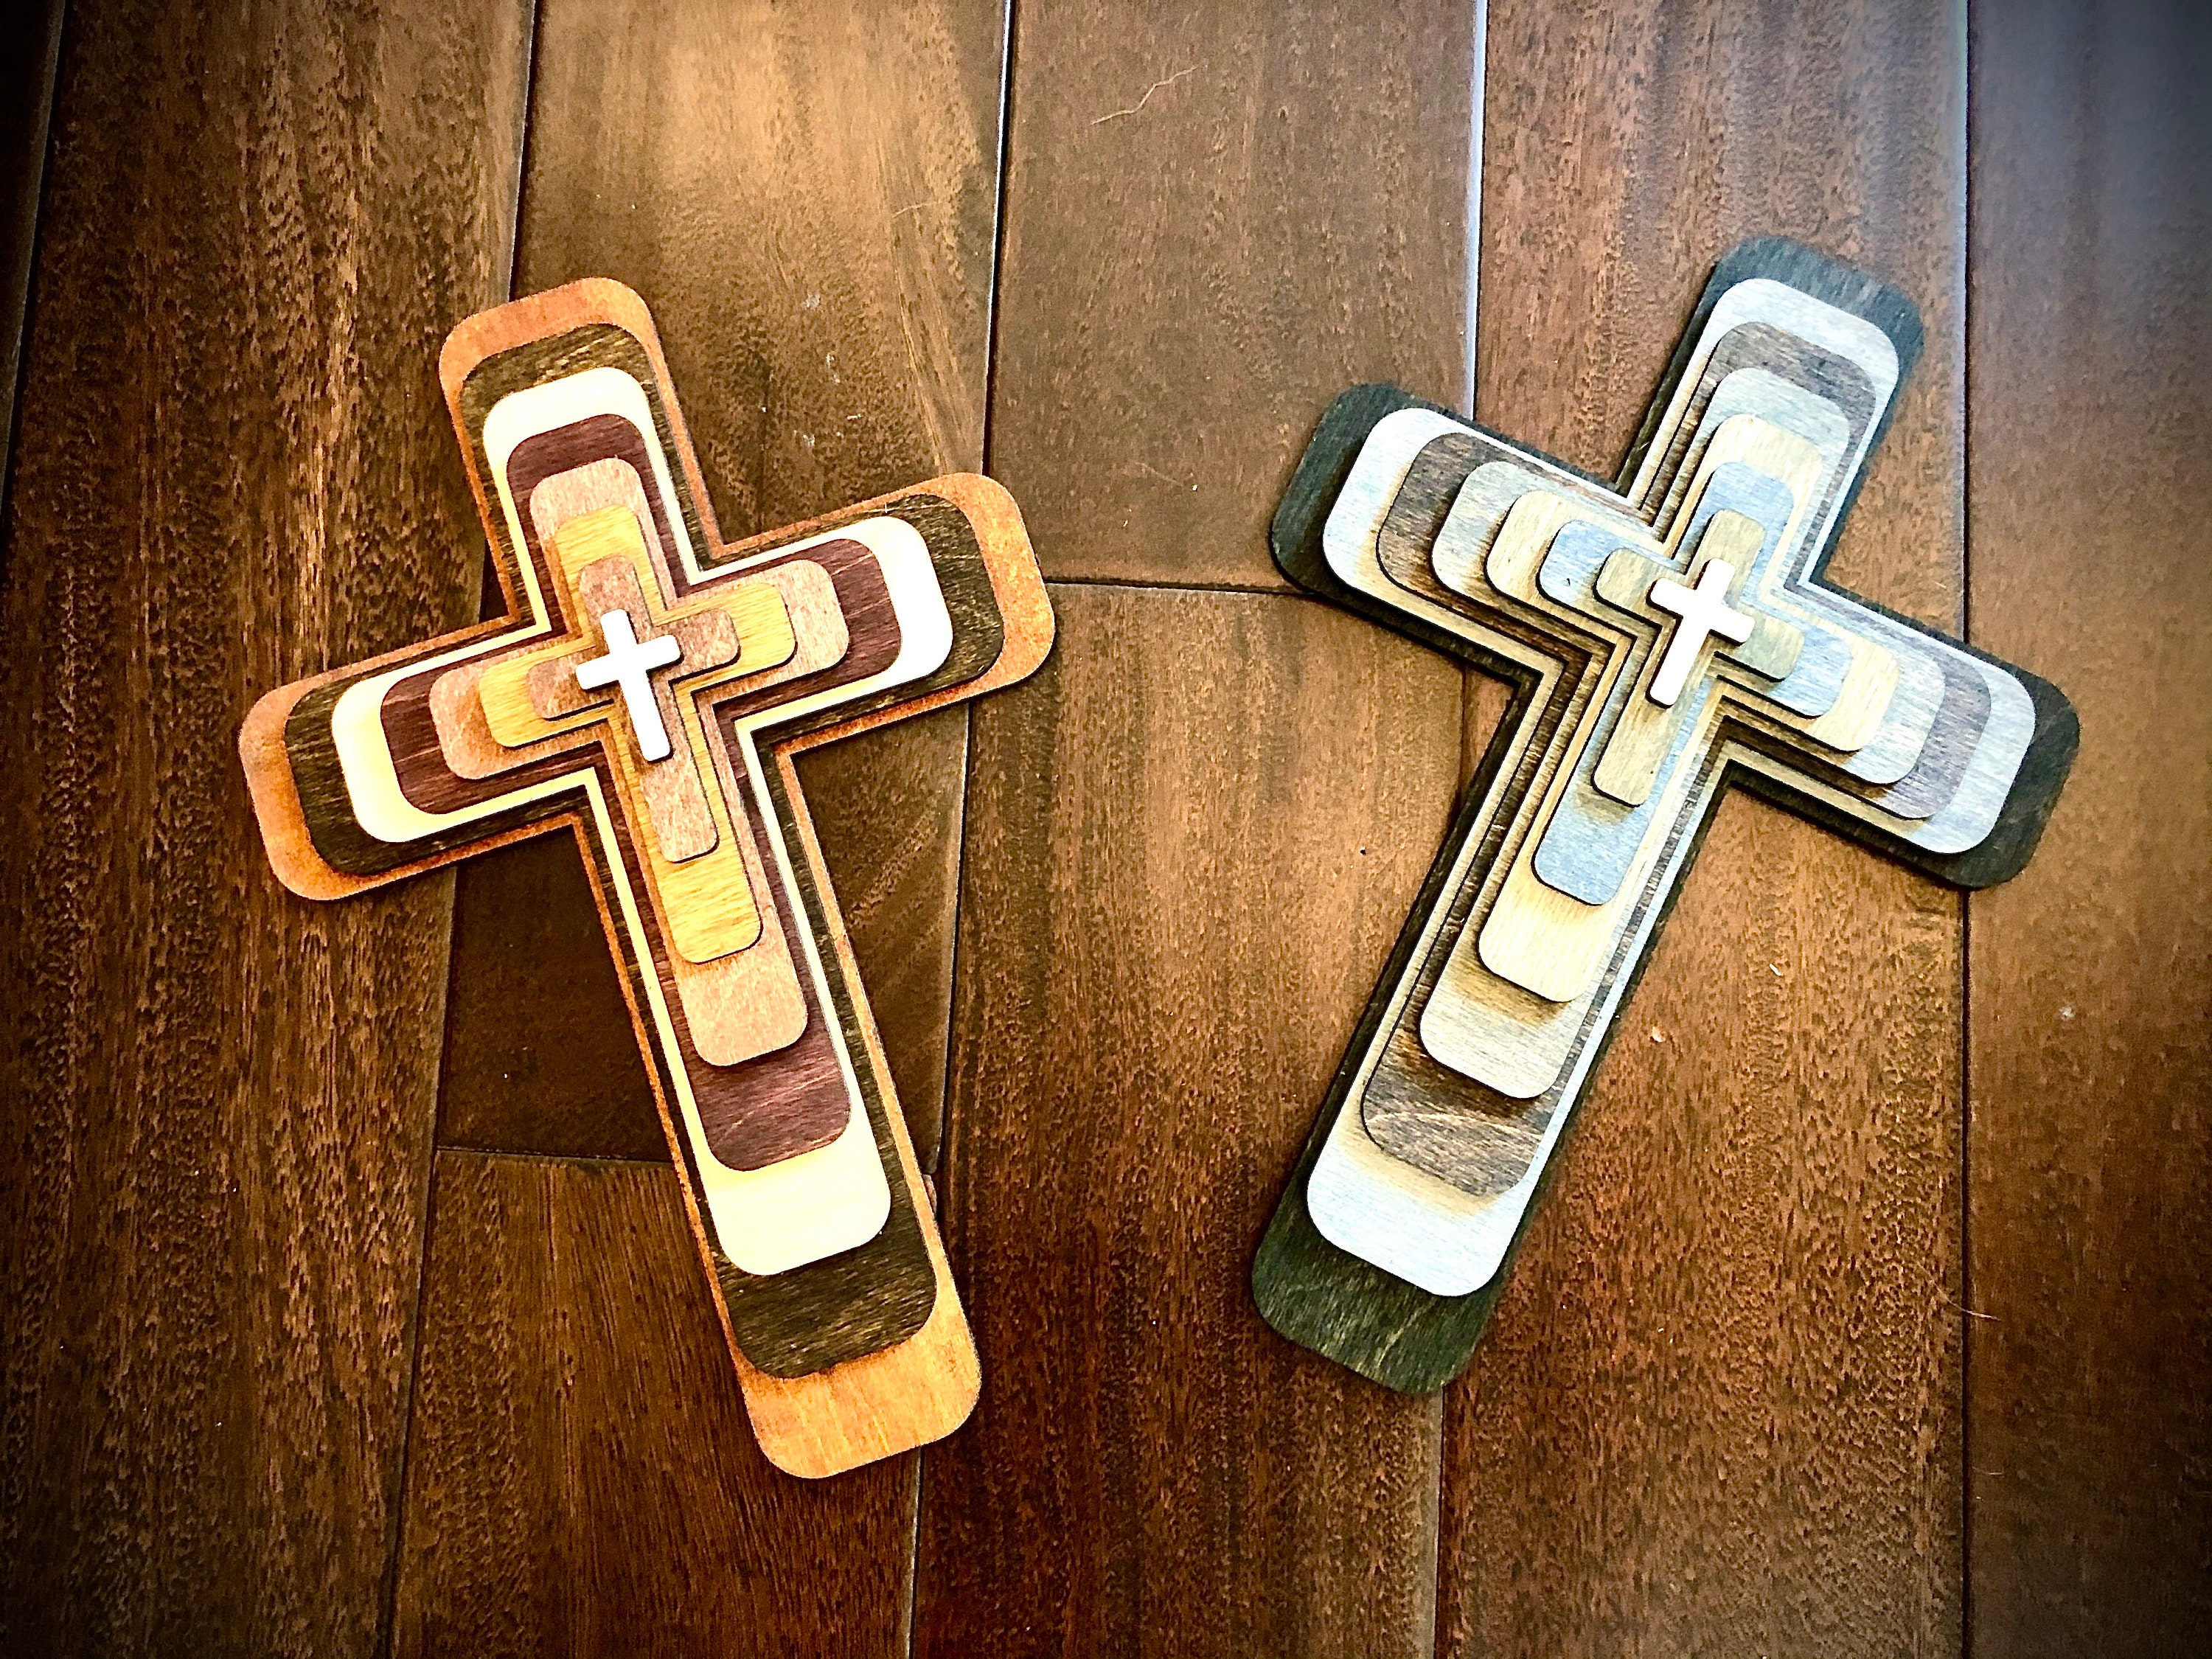 3,891 Three Wooden Crosses Images, Stock Photos, 3D objects